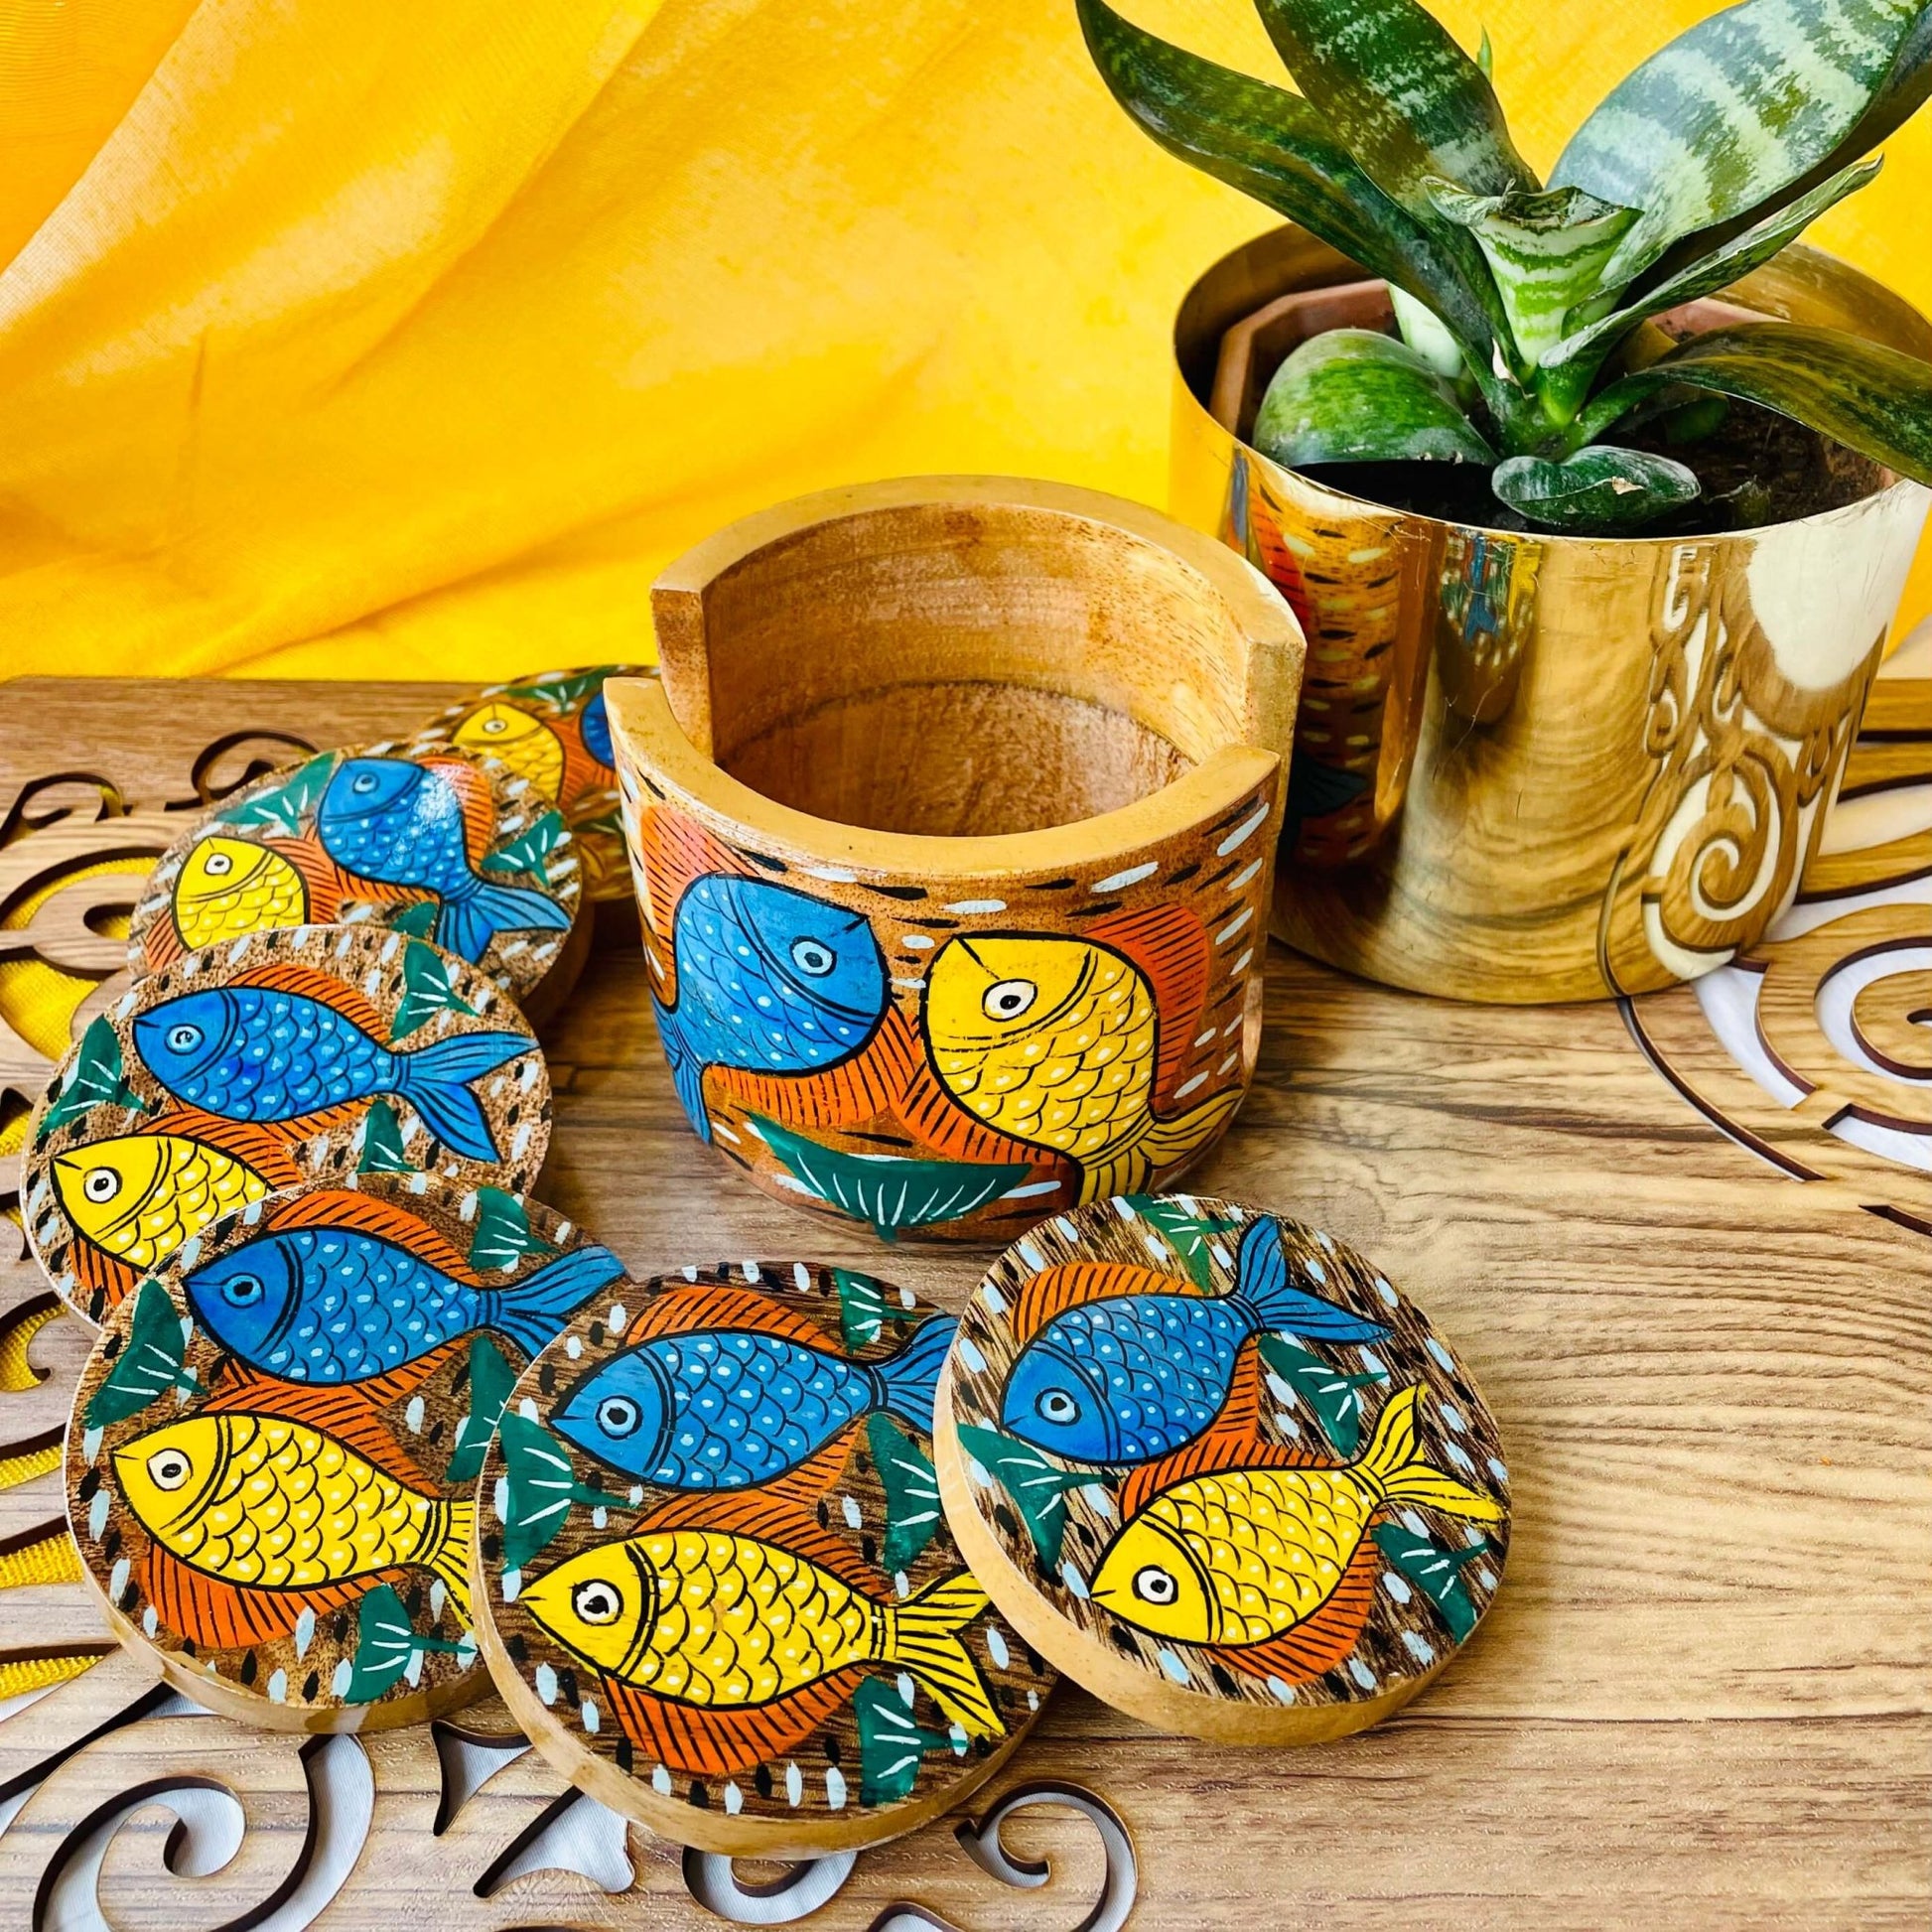 An empty coaster holder placed in front of a plant pot along with 6 round wooden coasters, all hand painted with blue and yellow fish motifs.